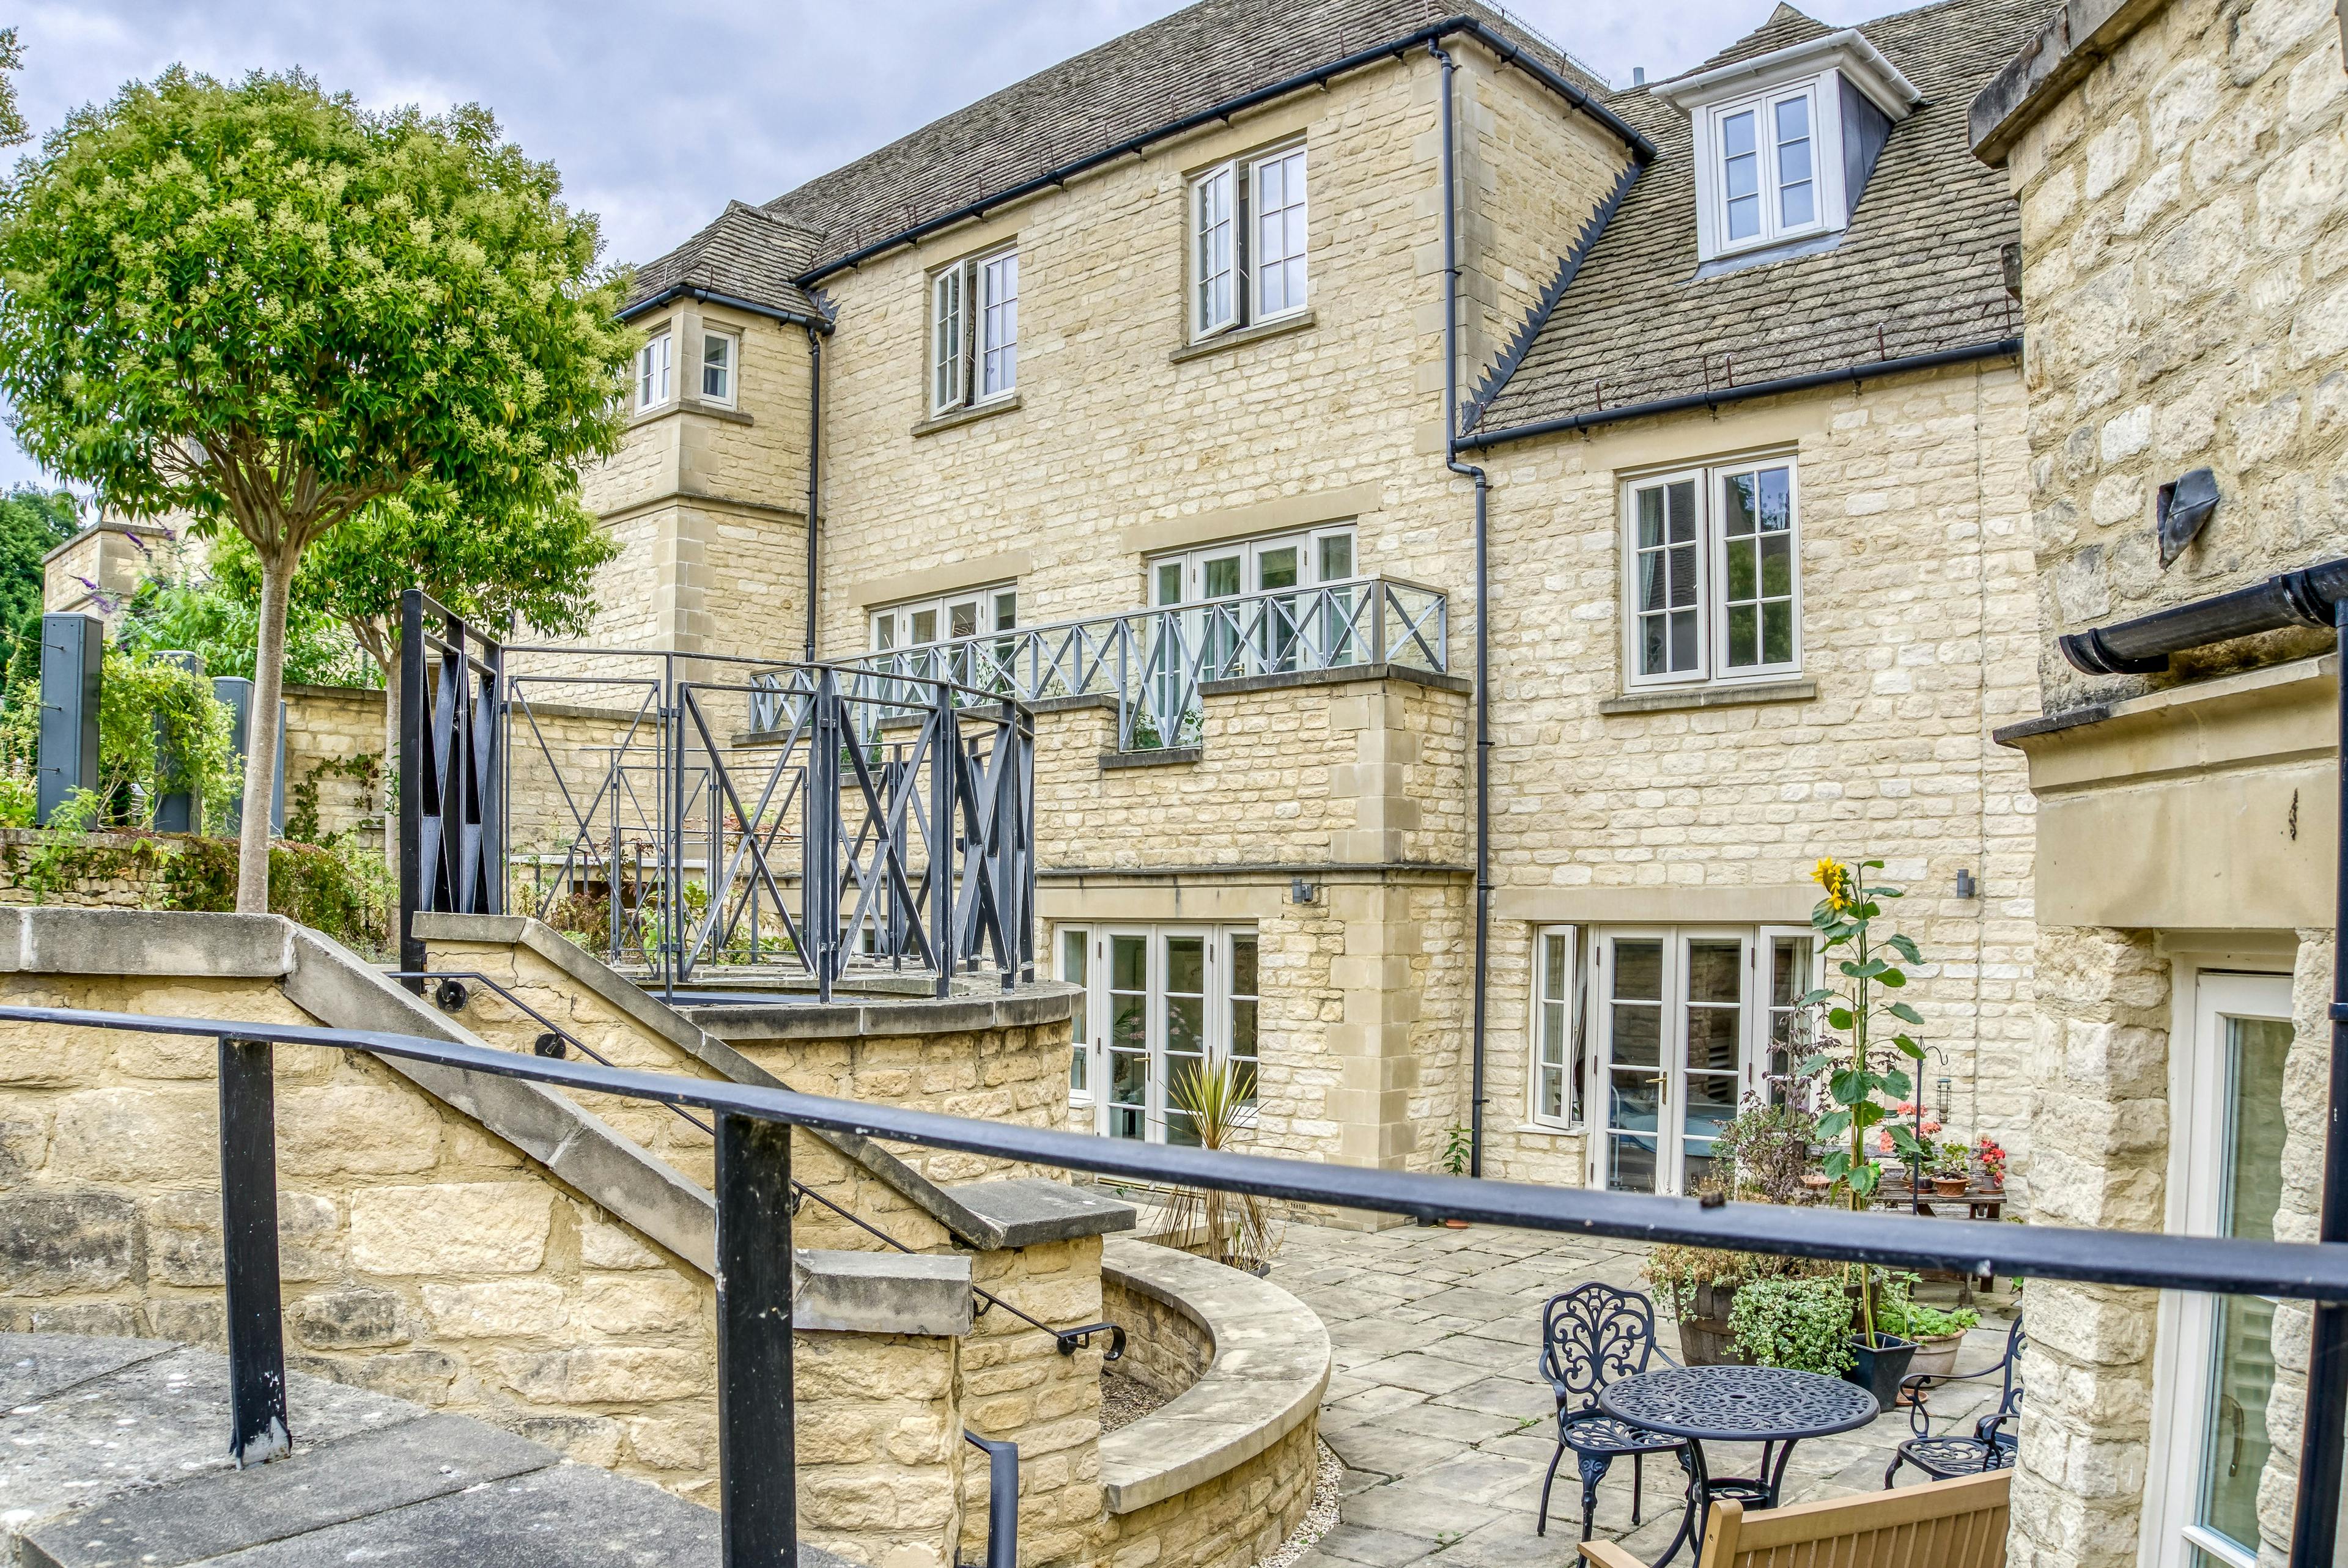 Exterior of Painswick care home in Painswick, Gloucestershire